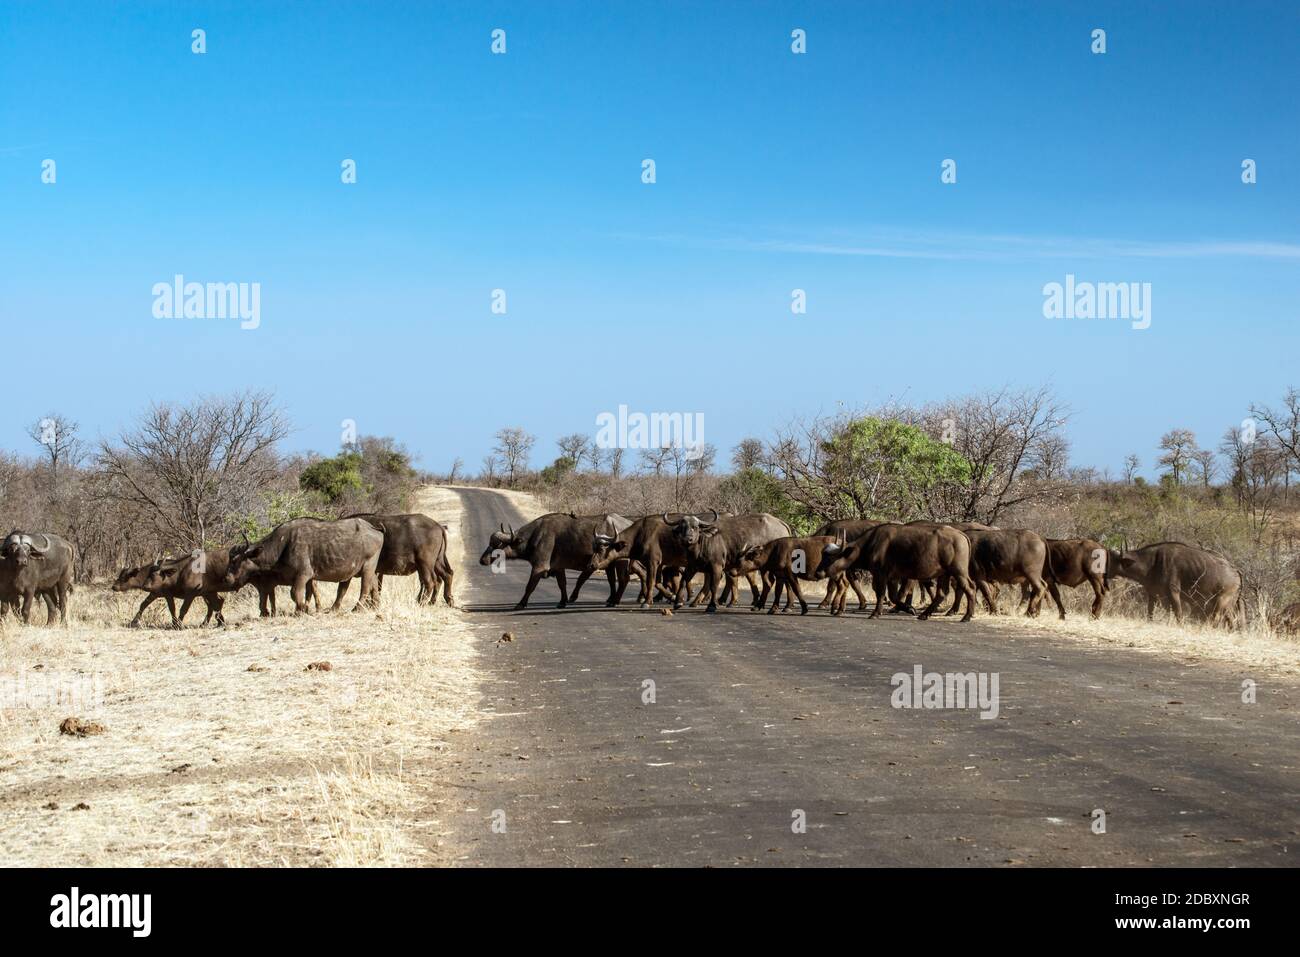 Buffalo herd in the Kruger National Park in South Africa Stock Photo